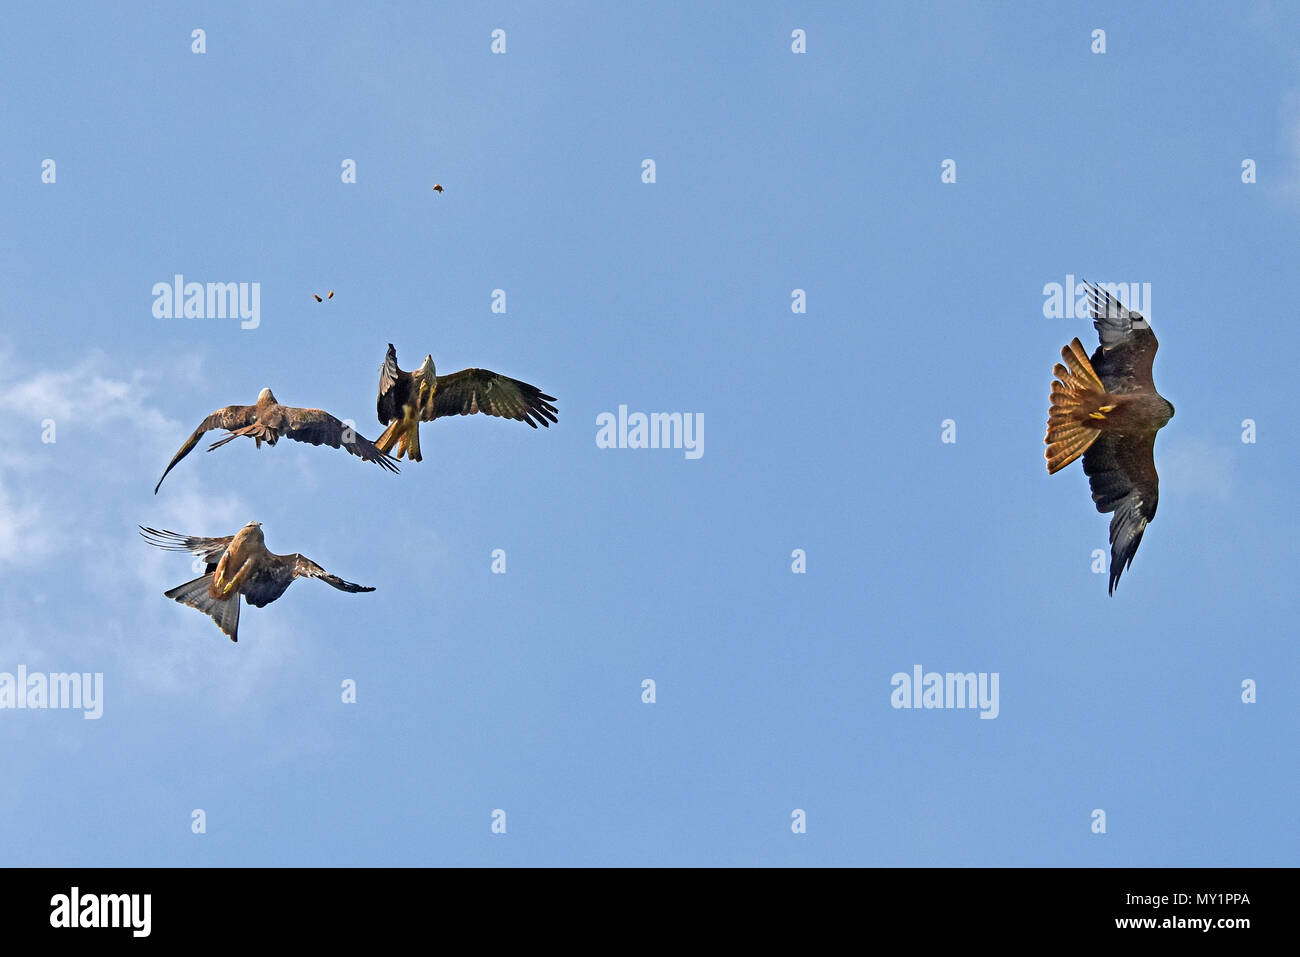 A group of 4 Black Kites (Milvus migrans) competing for food catapulted from the ground at the Hawk Conservancy Trust in Southern England Stock Photo